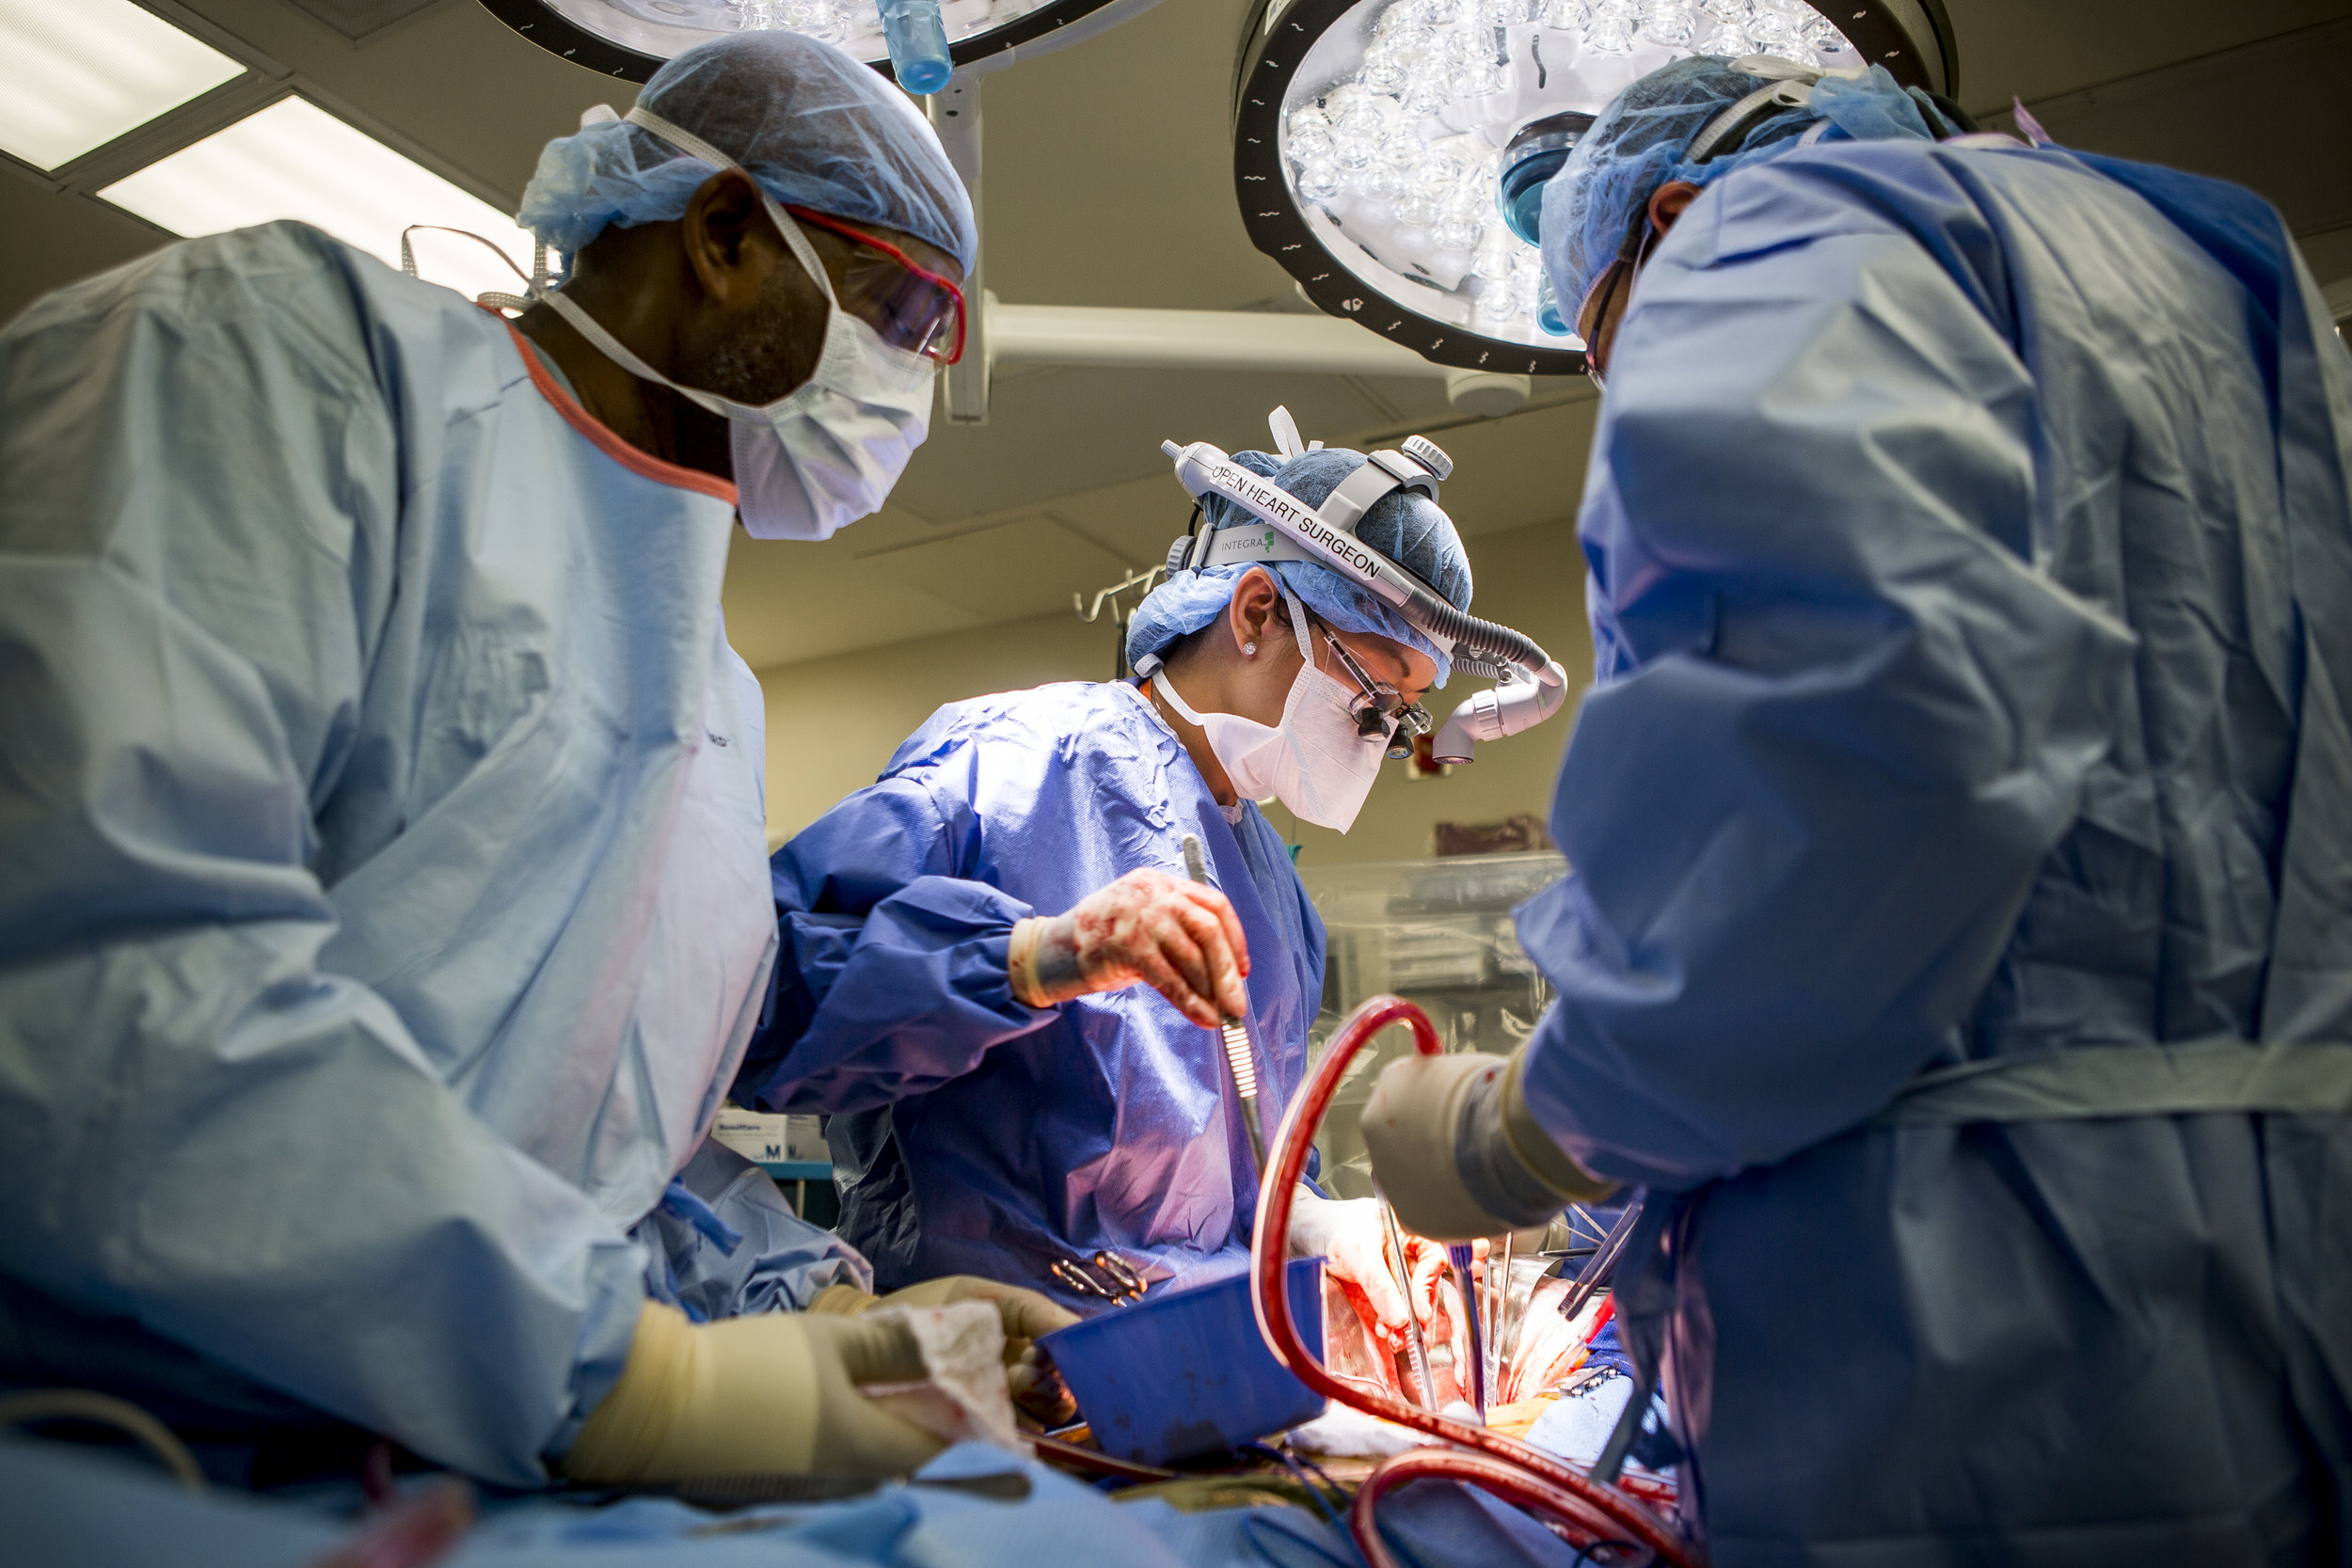  Dr. Quynh Feikesm, center, performs a surgery to fix an abdominal aneurysm with assistance from John Cousett, left, a Certified Heart Scrub Tech and assistant Tracy Blankenship at University Medical Center on Tuesday, May 23, 2017. Dr. Feikes is the